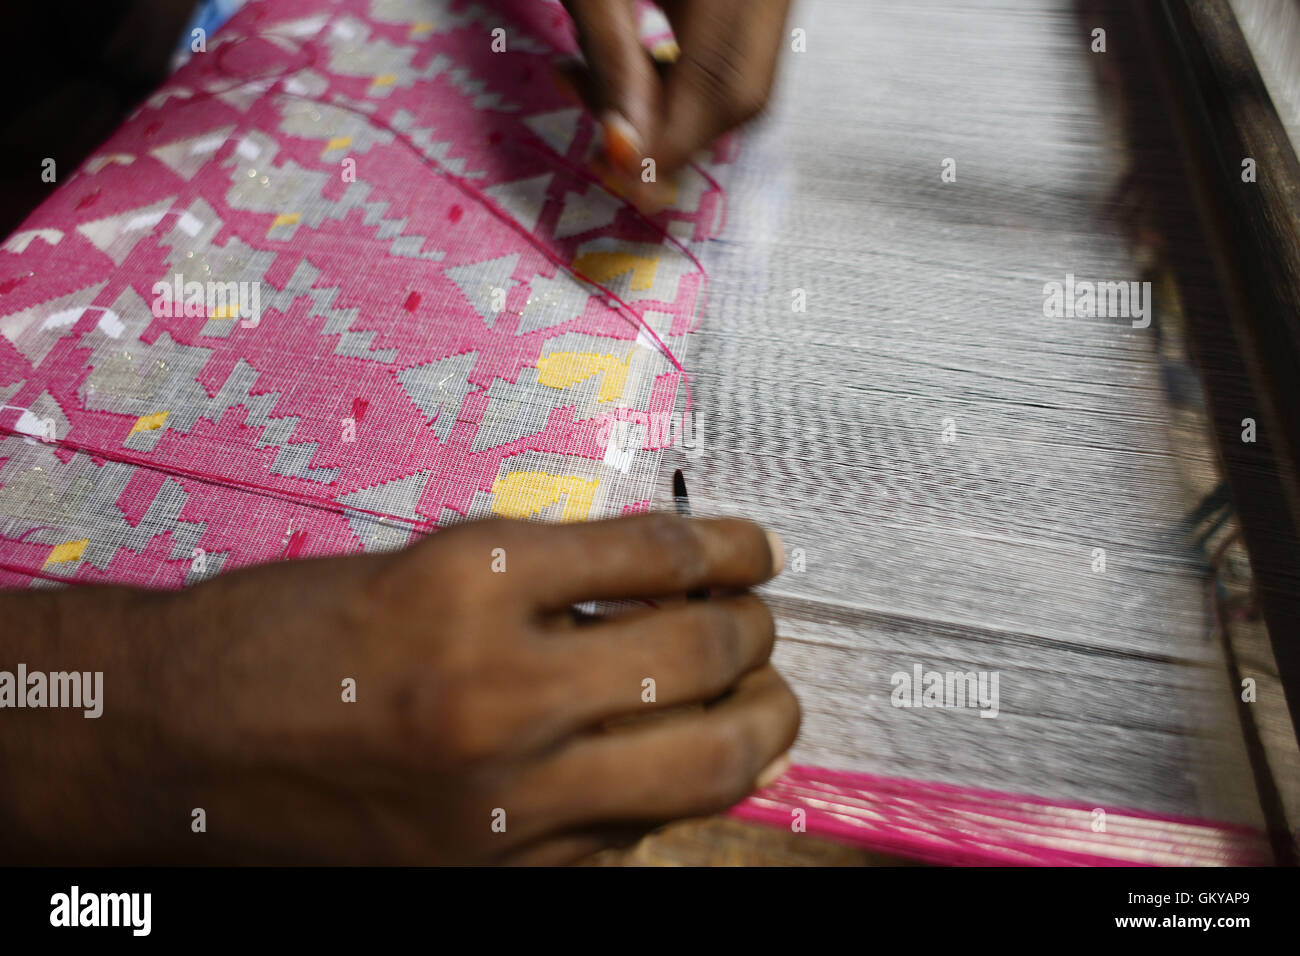 Near Dhaka, Bangladesh. 24th Aug, 2016. Handloom weaver weaves Jamdani saree on a traditional wooden hand weaving loom at Tarabo, near Dhaka, Bangladesh, August 24, 2016. Jamdani is one of the finest muslin textiles of Bengal, produced in Dhaka District, Bangladesh for centuries. The historic production of jamdani was patronized by imperial warrants of the Mughal emperors. Under British colonialism, the Bengali Jamdani and muslin industries rapidly declined due to colonial import policies favoring industrially manufactured textiles. In more recent years, the production of Jamdani has witne Stock Photo